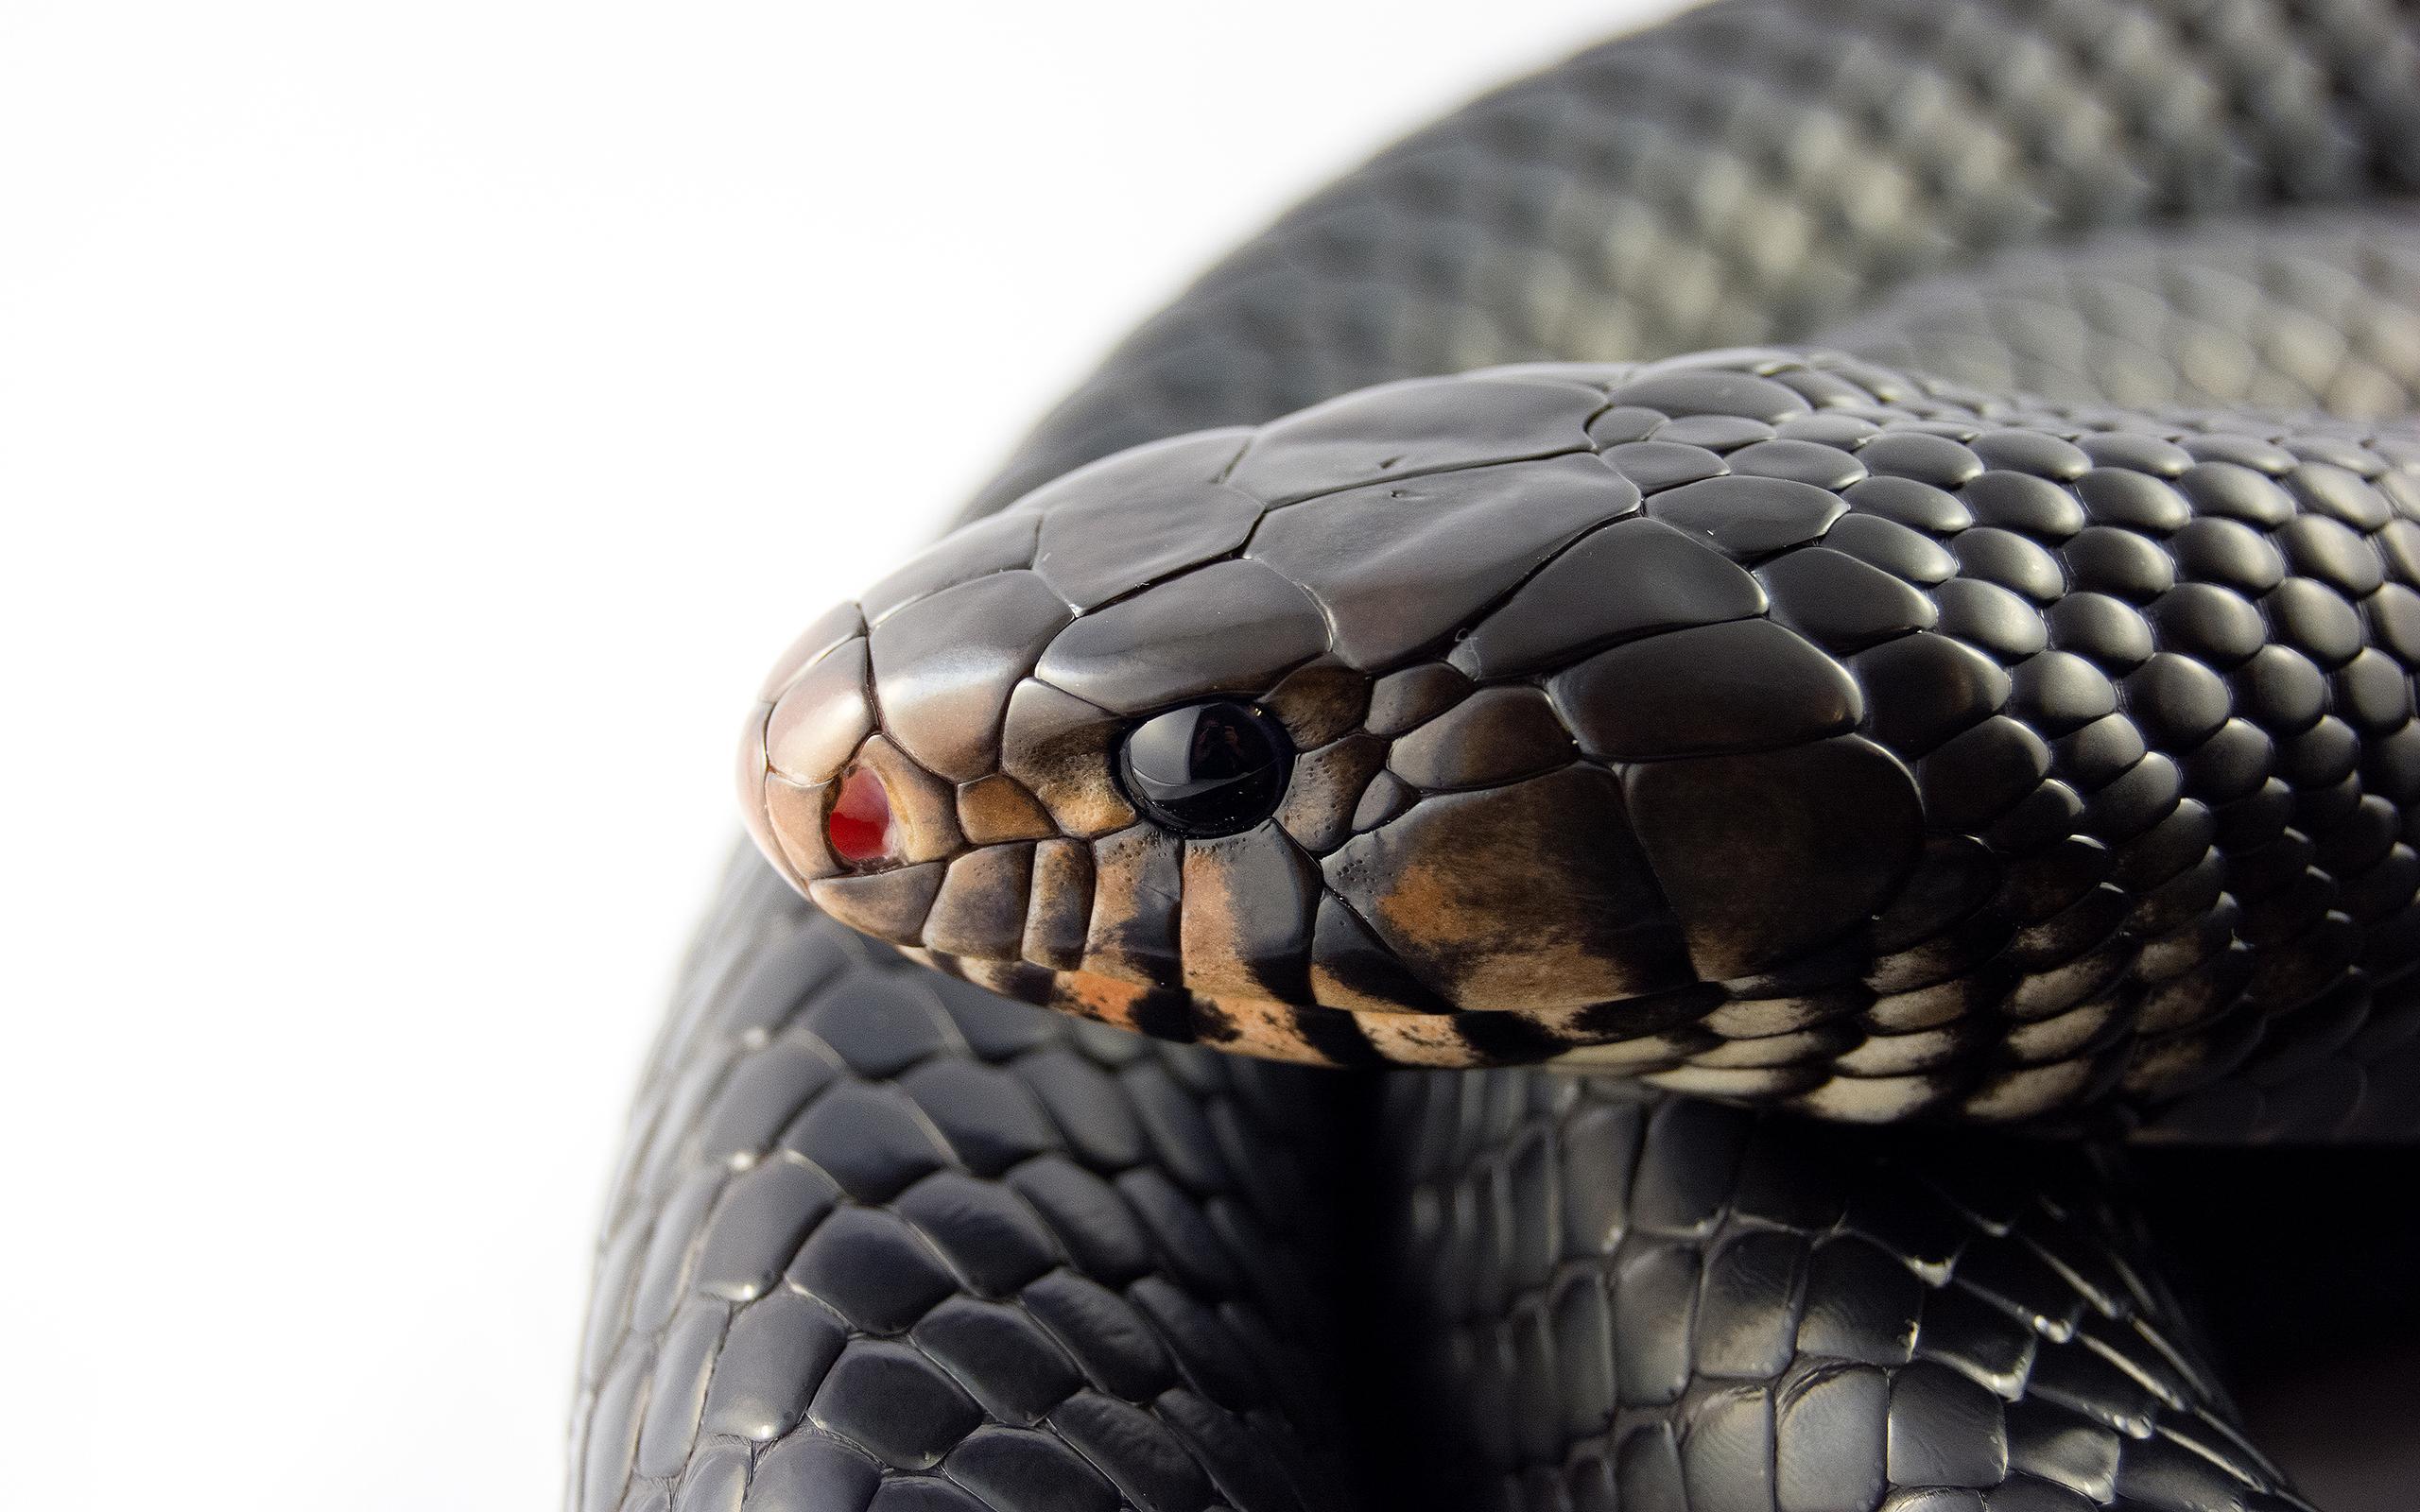 Snakes Wallpaper Picture HD Image Free Photo 4K for Android